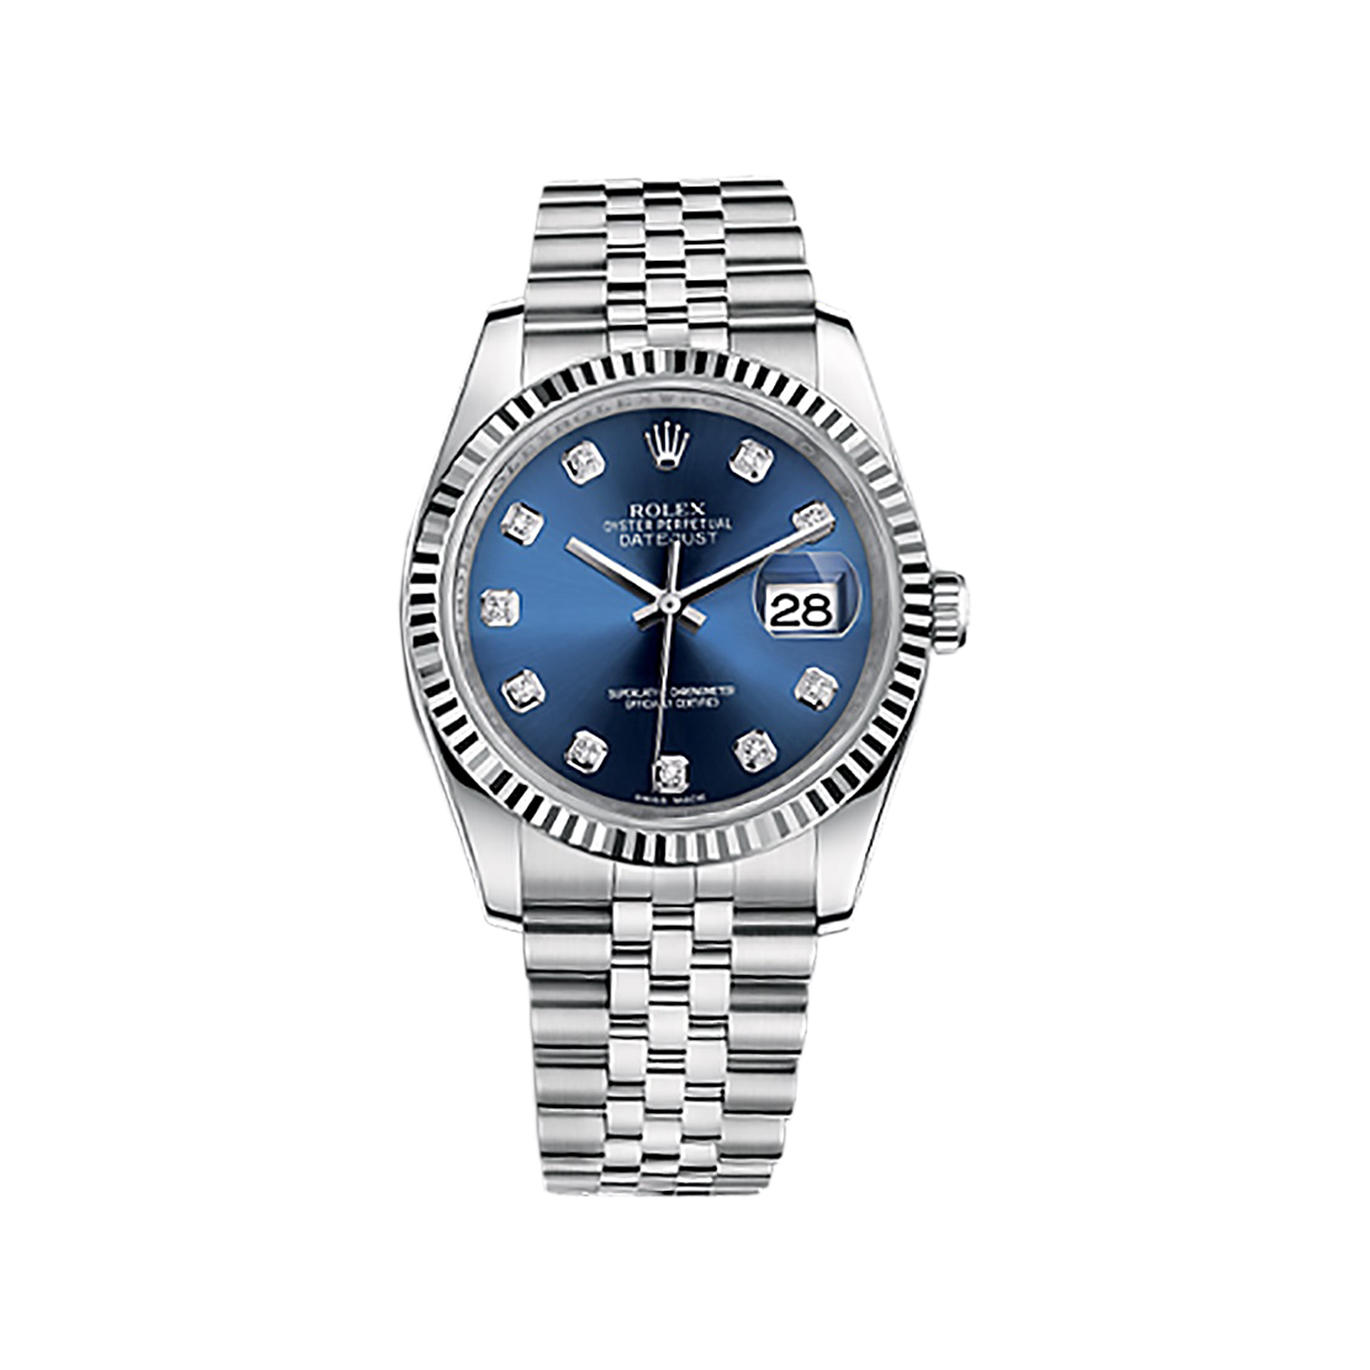 Datejust 36 116234 White Gold & Stainless Steel Watch (Blue Set with Diamonds)